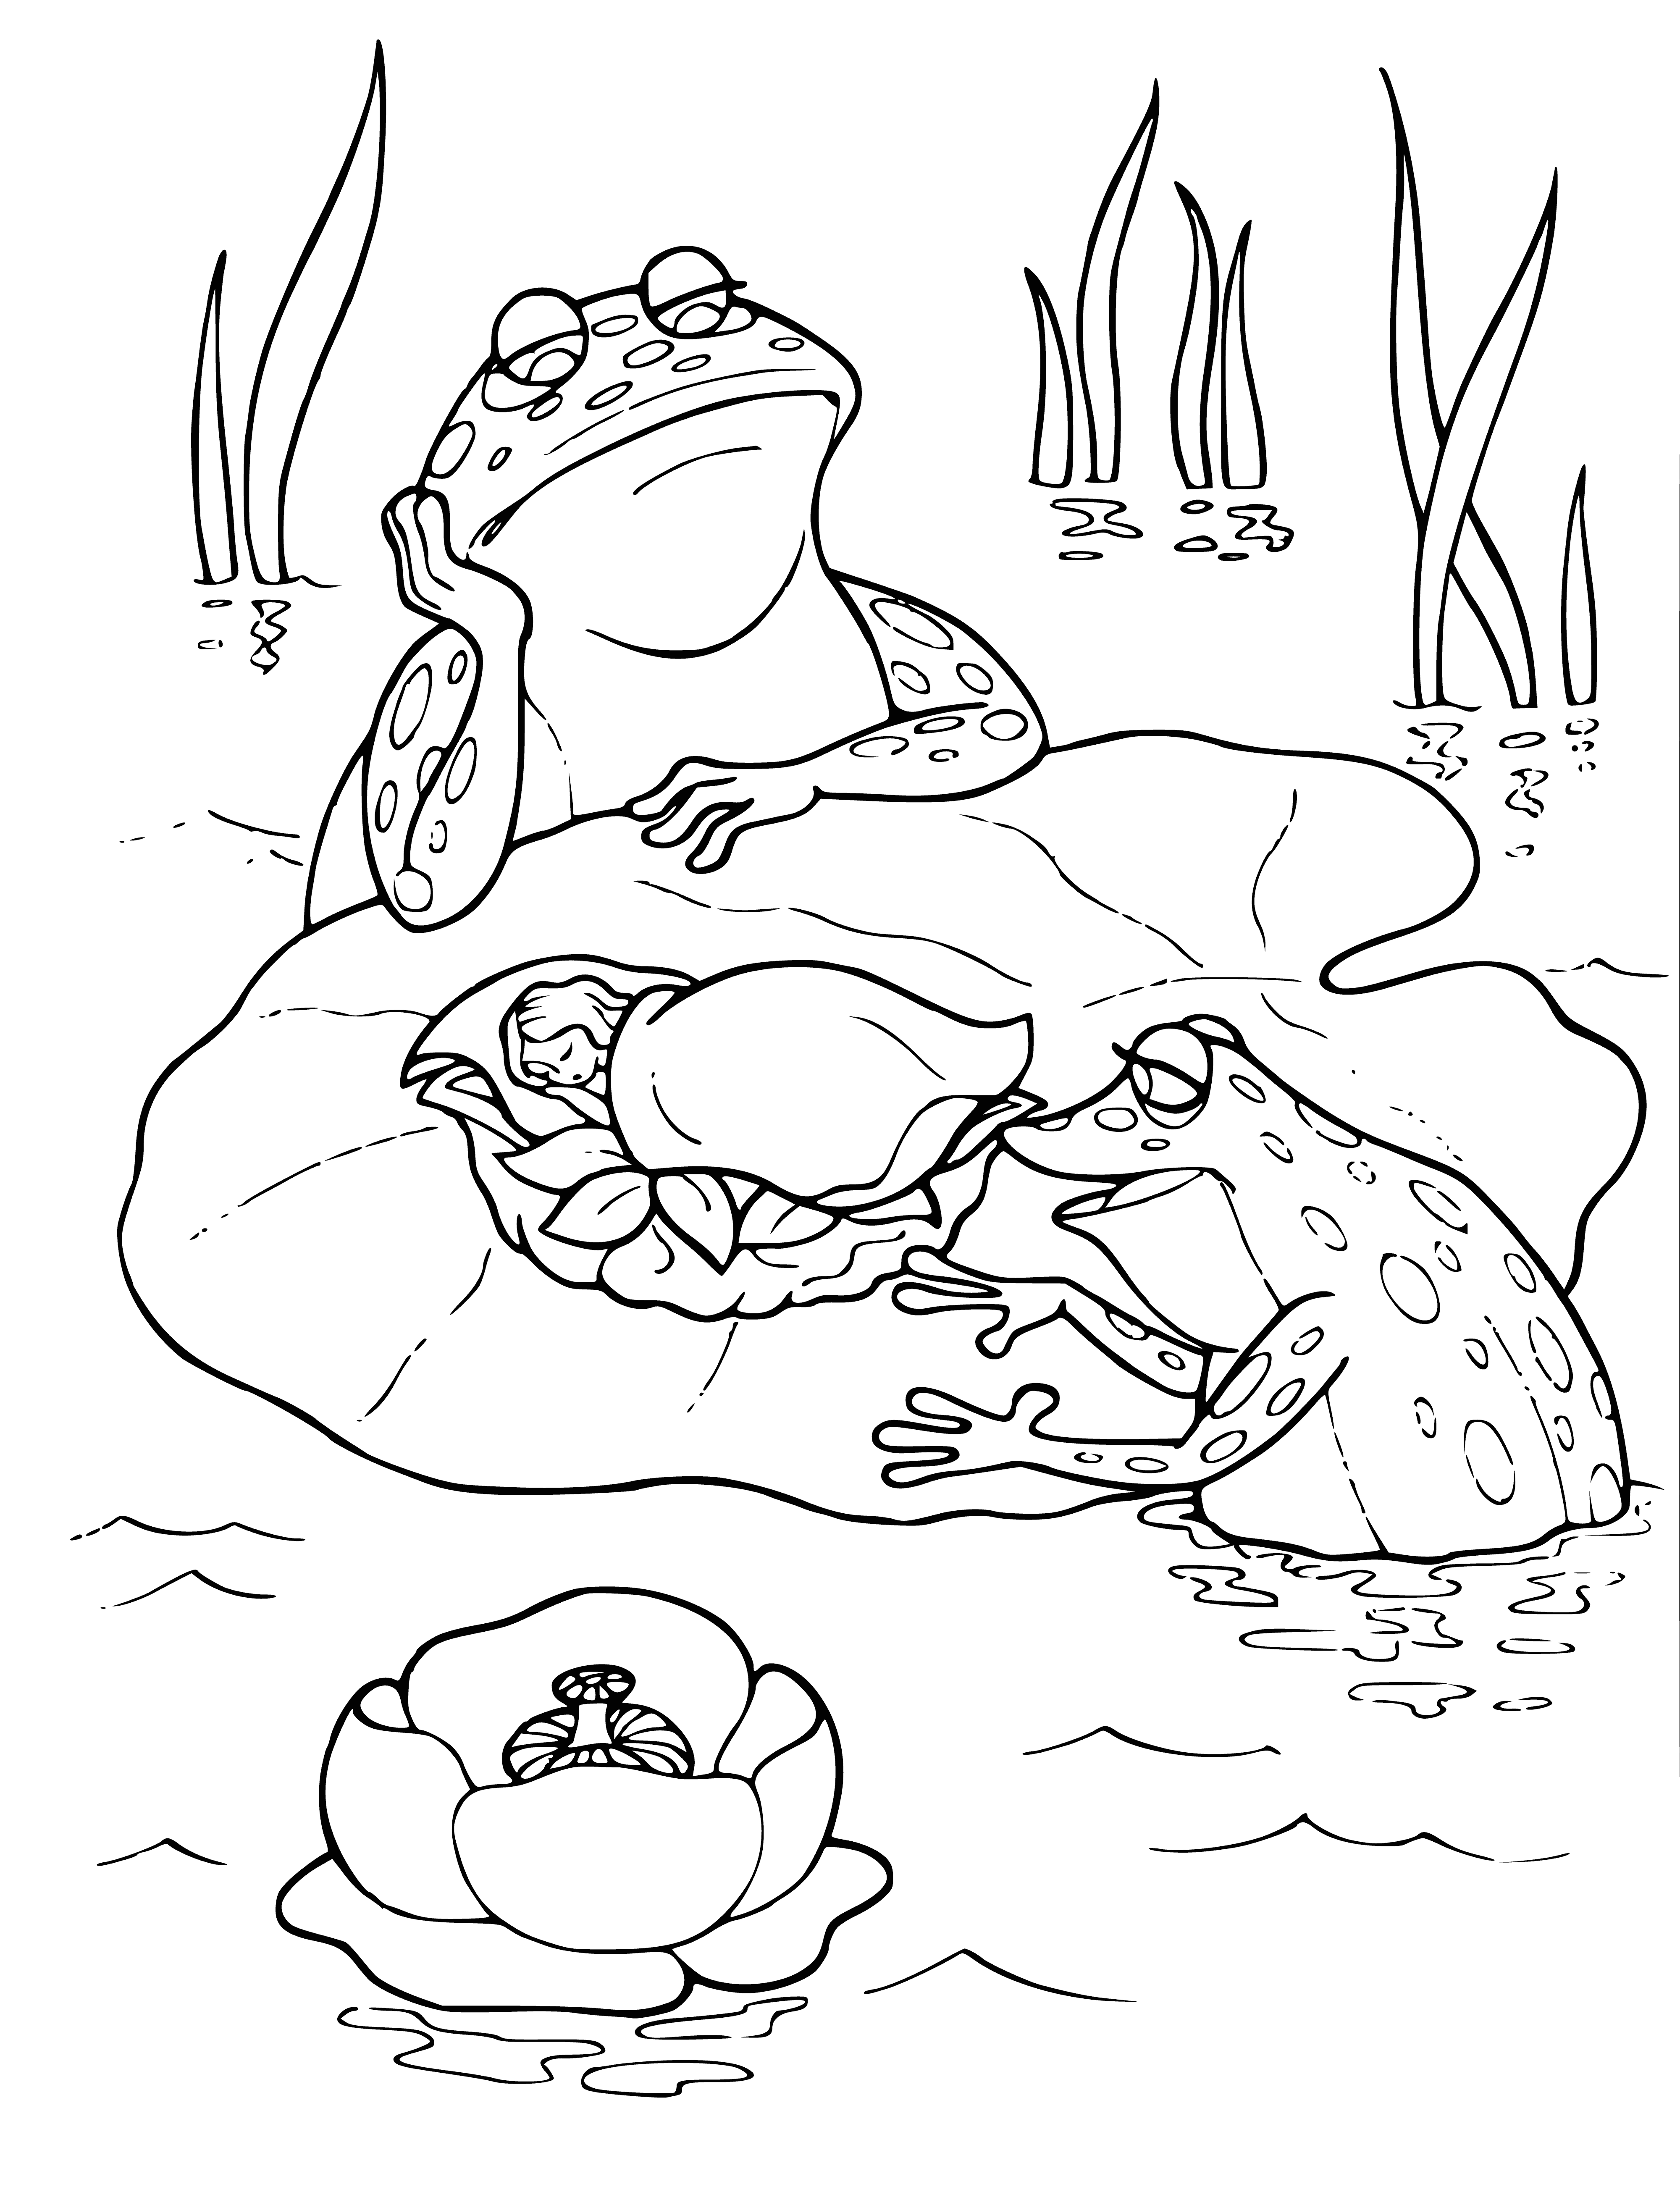 Cradle with Thumbelina by toads coloring page